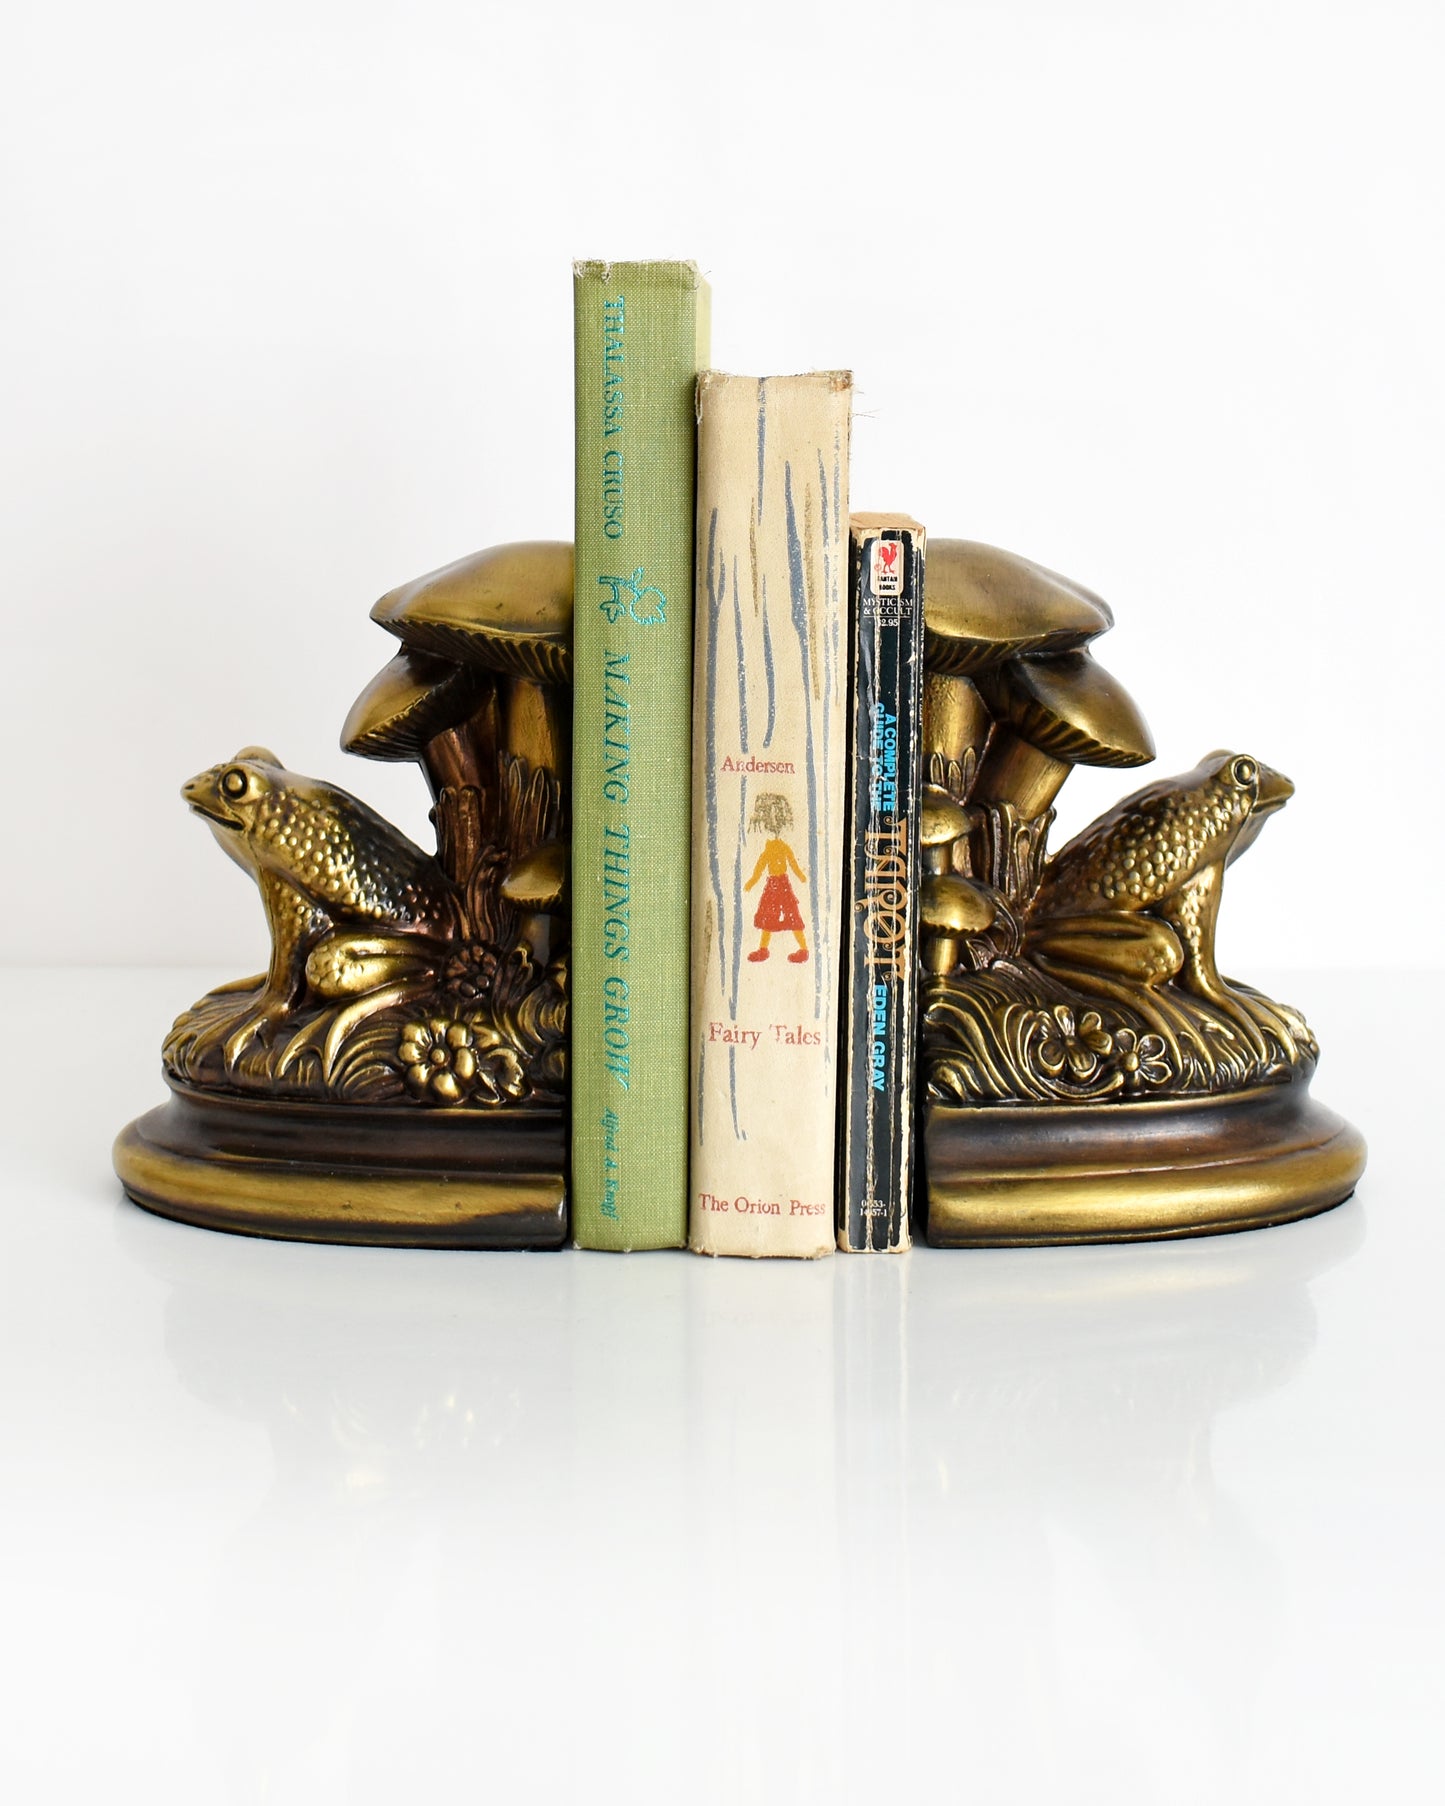  vintage brass frog and mushroom bookends with three books in the middle